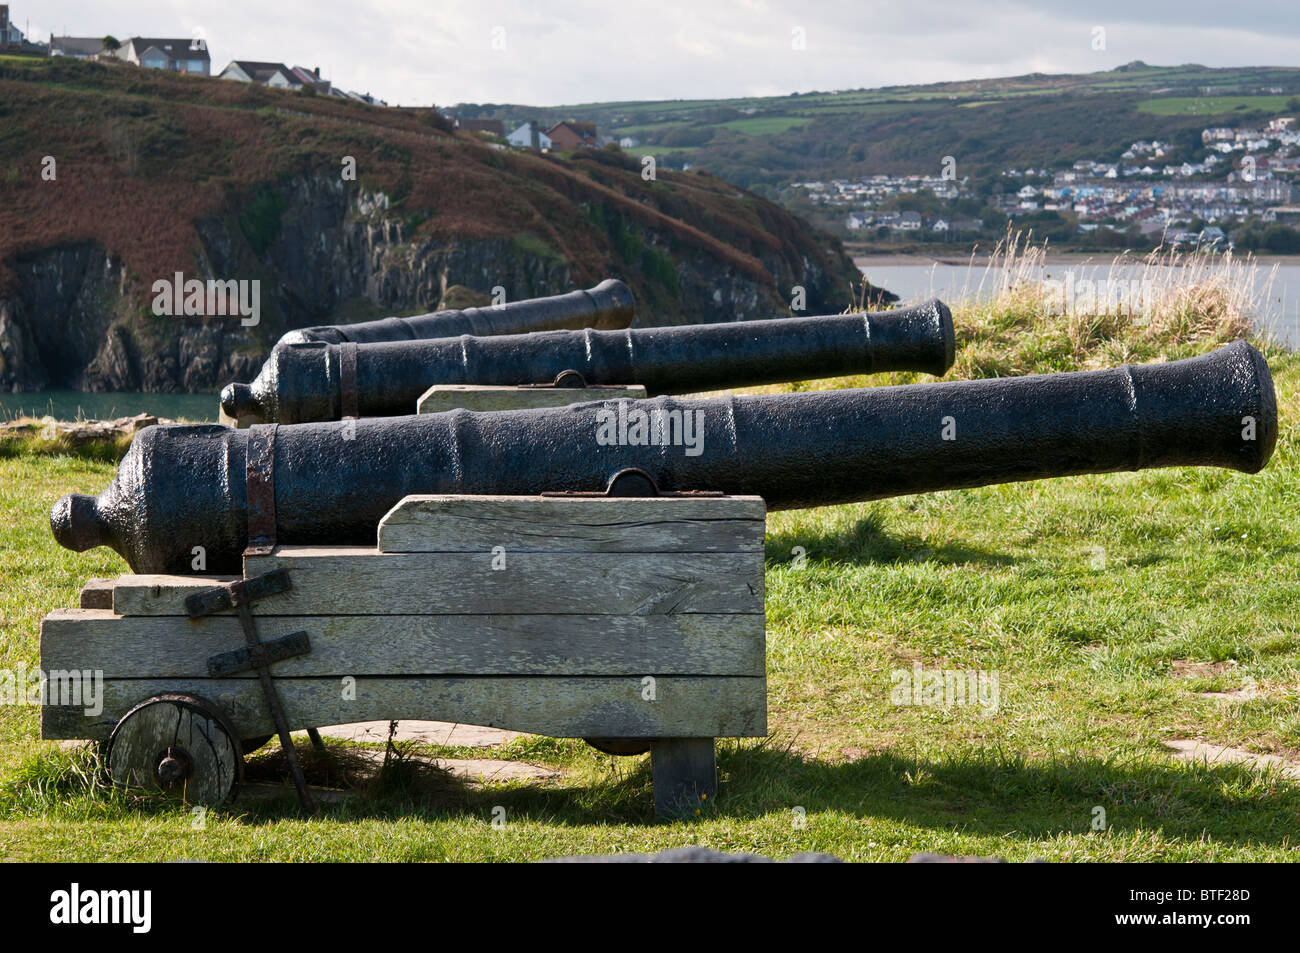 Canons on the headland at Fishguard harbour in Pembrokeshire, Wales. Location of the 'last invasion of Britain'. Stock Photo